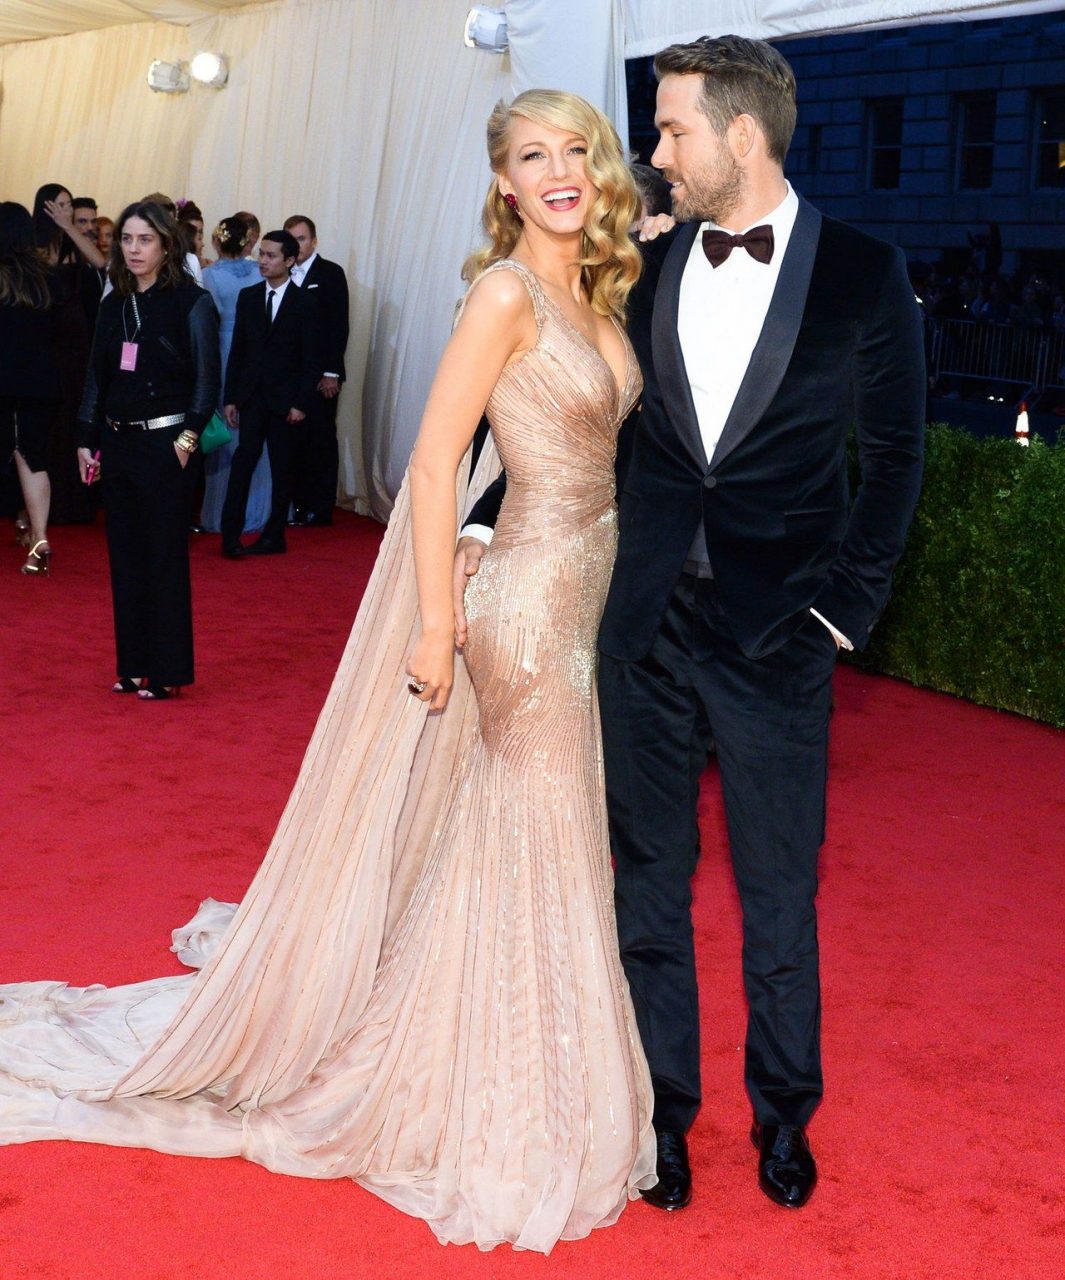 Ryan Reynolds Red Carpet Arrival With Wife Blake Lively